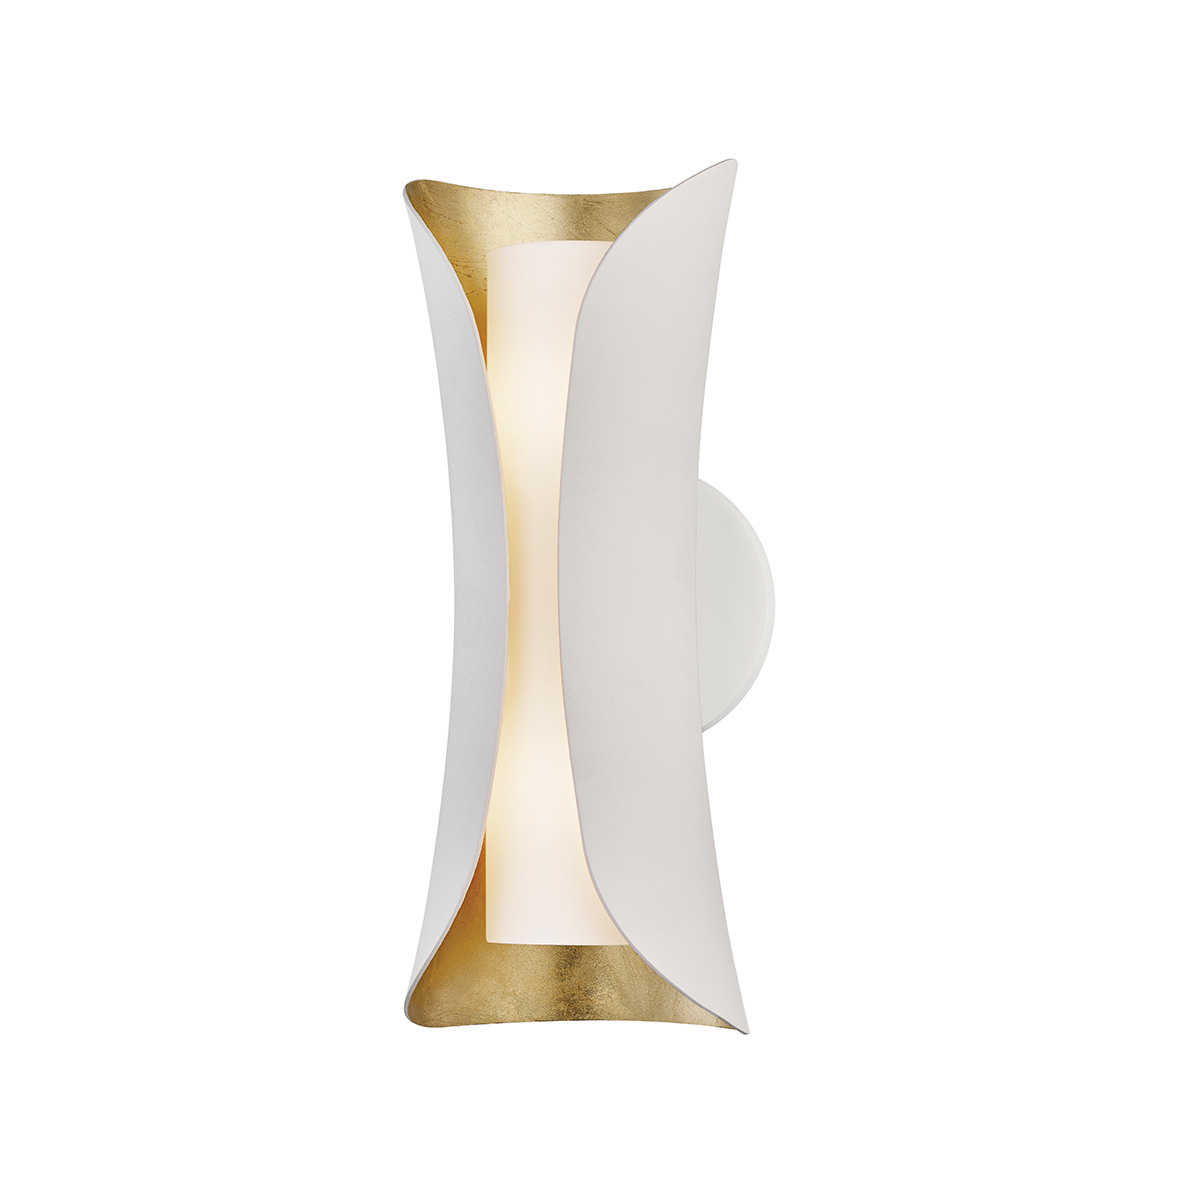 Hudson Valley Lighting Josie Wall Sconce with White and Gold Metal